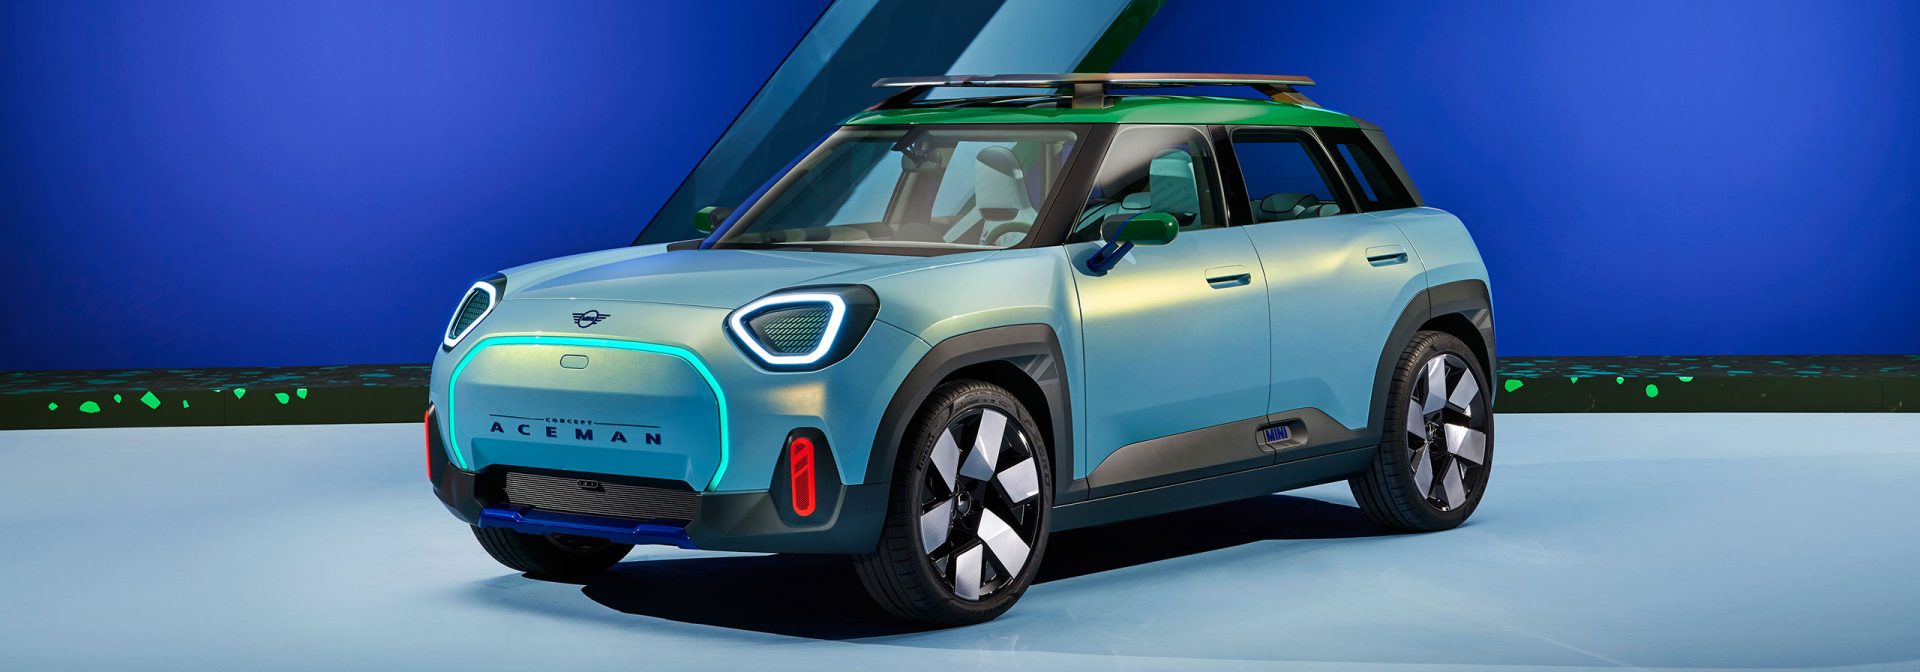 Mini Debuts All-Electric Crossover, the Aceman, at Beijing Auto Show